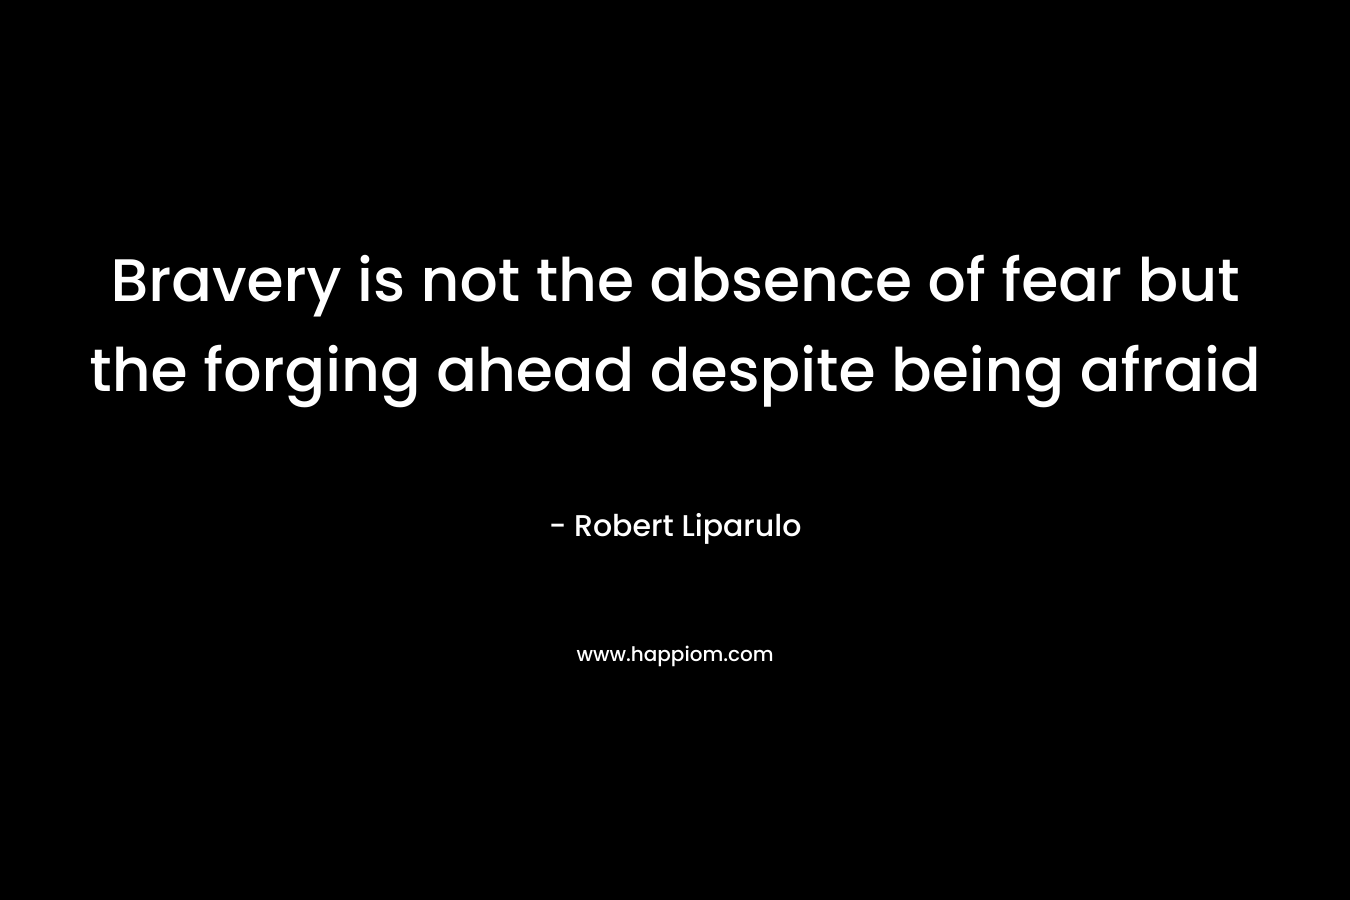 Bravery is not the absence of fear but the forging ahead despite being afraid – Robert Liparulo